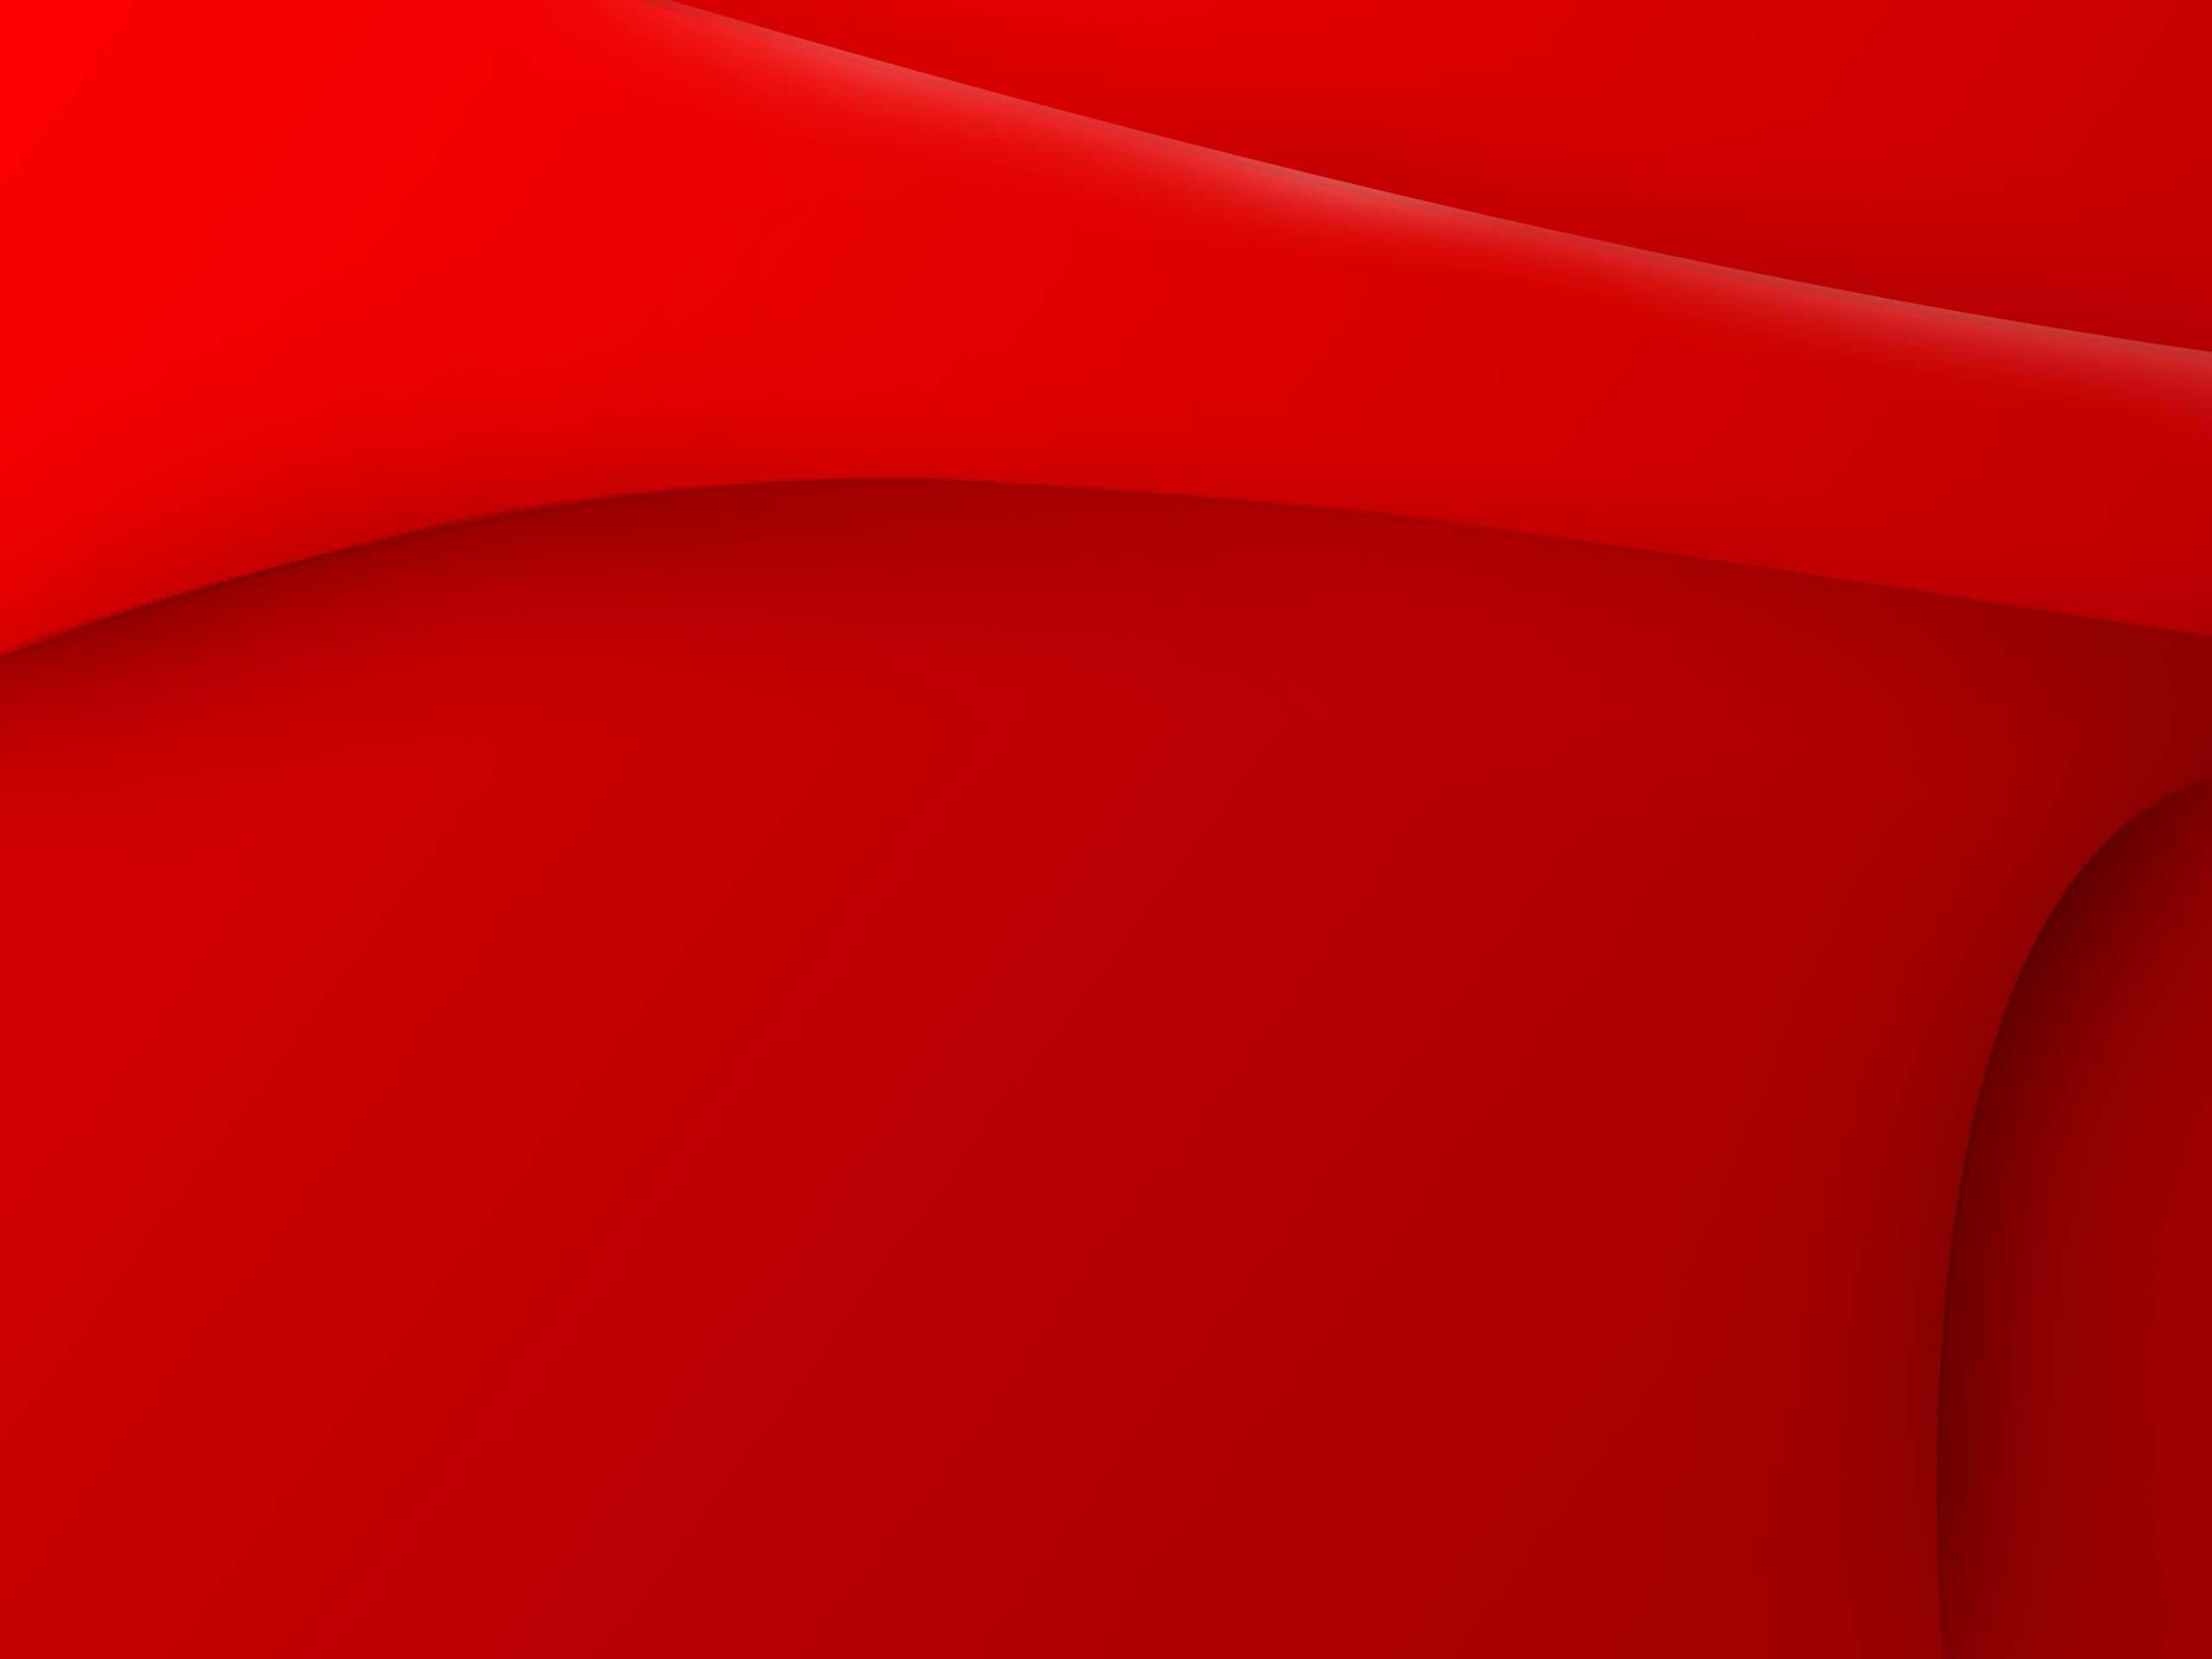  FREE  21 Red  Abstract Backgrounds  in PSD AI Vector EPS